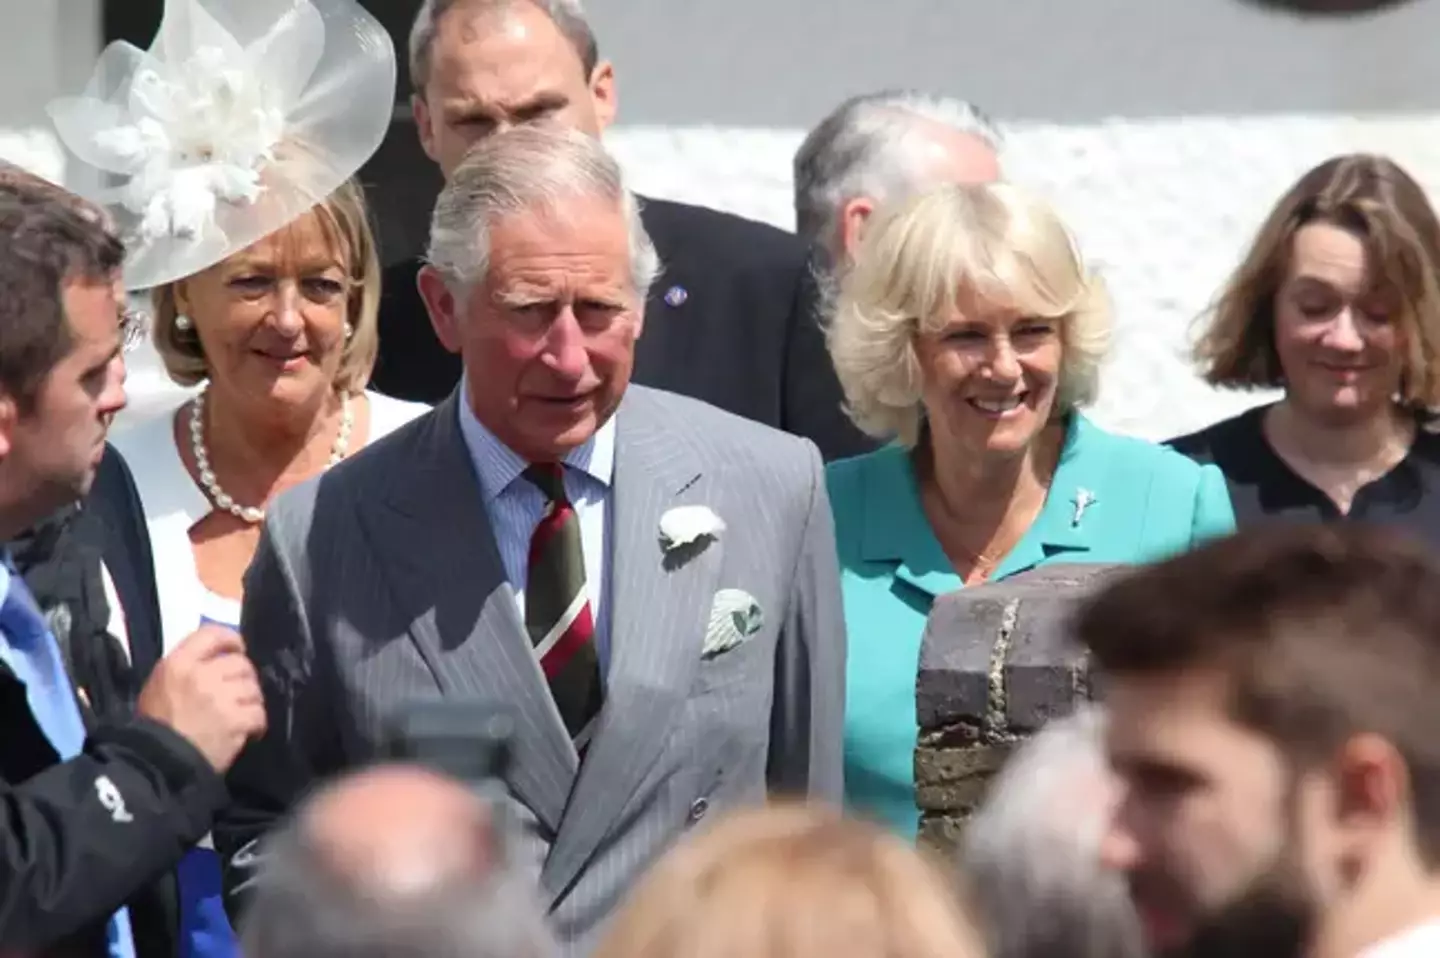 Charles and Camilla's coronation will be marked with an extra bank holiday in the UK.